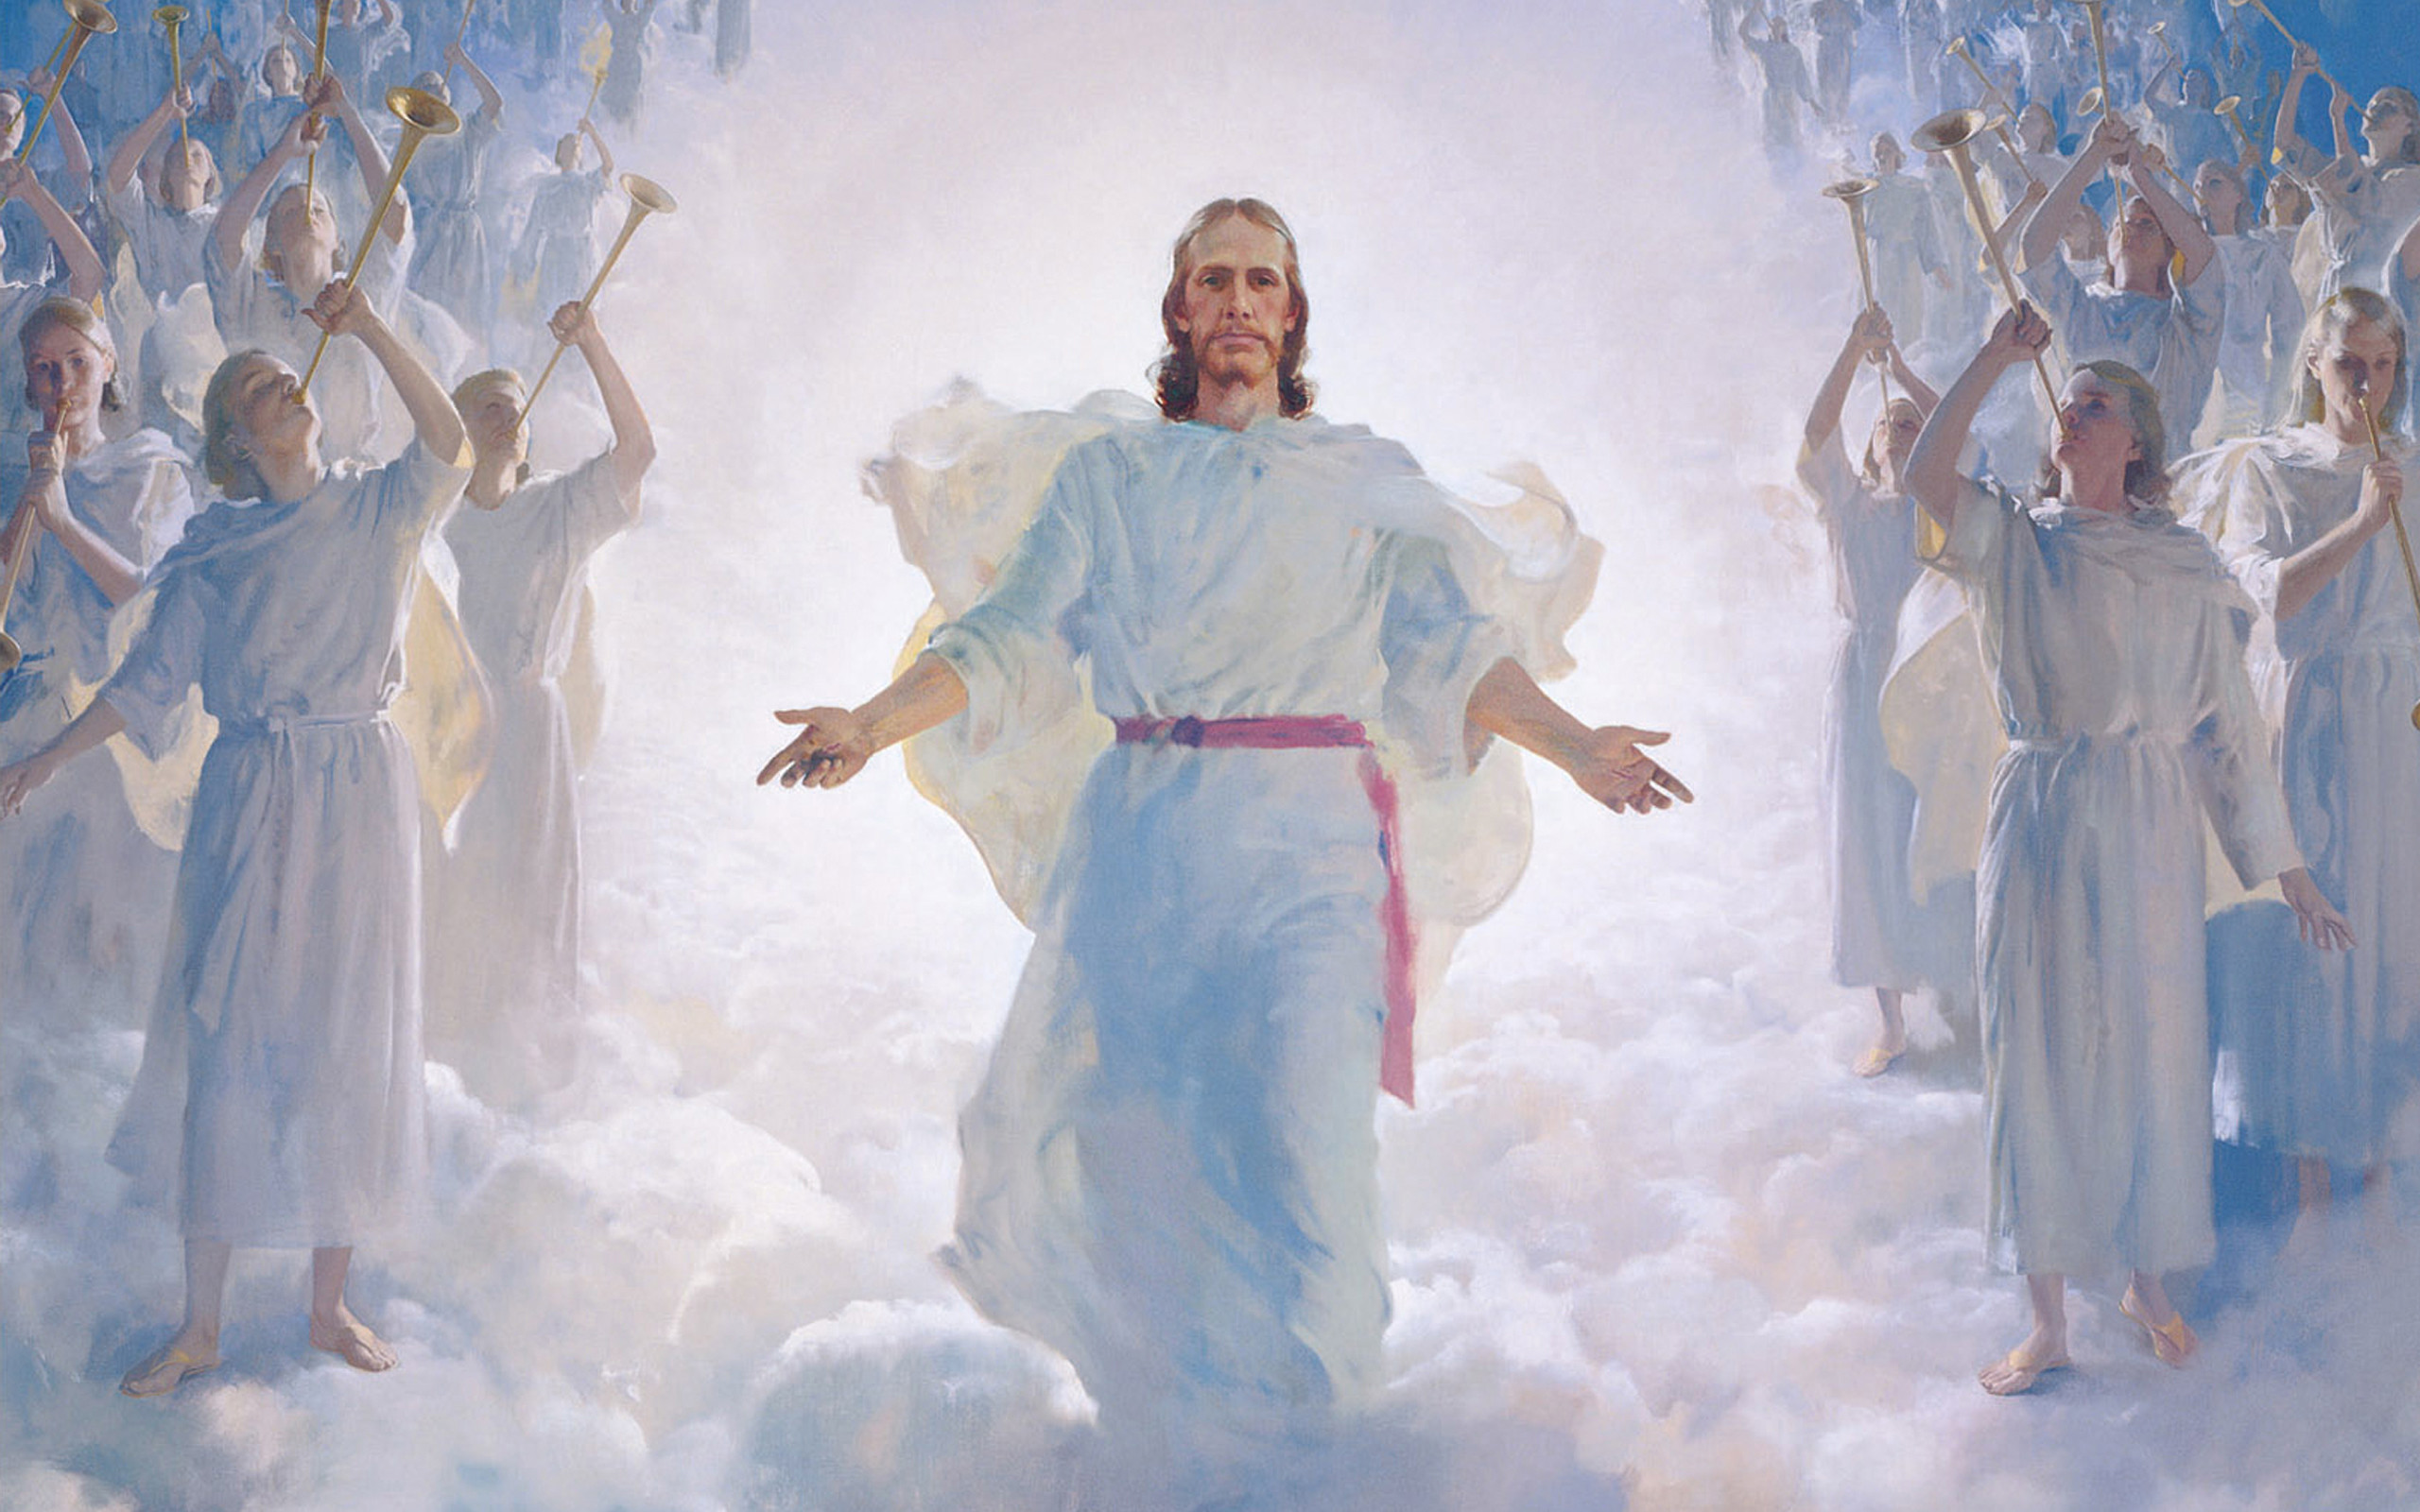 2560x1600 High Quality Creative 1833,77 Kb Photo for Jesus Christ LDS